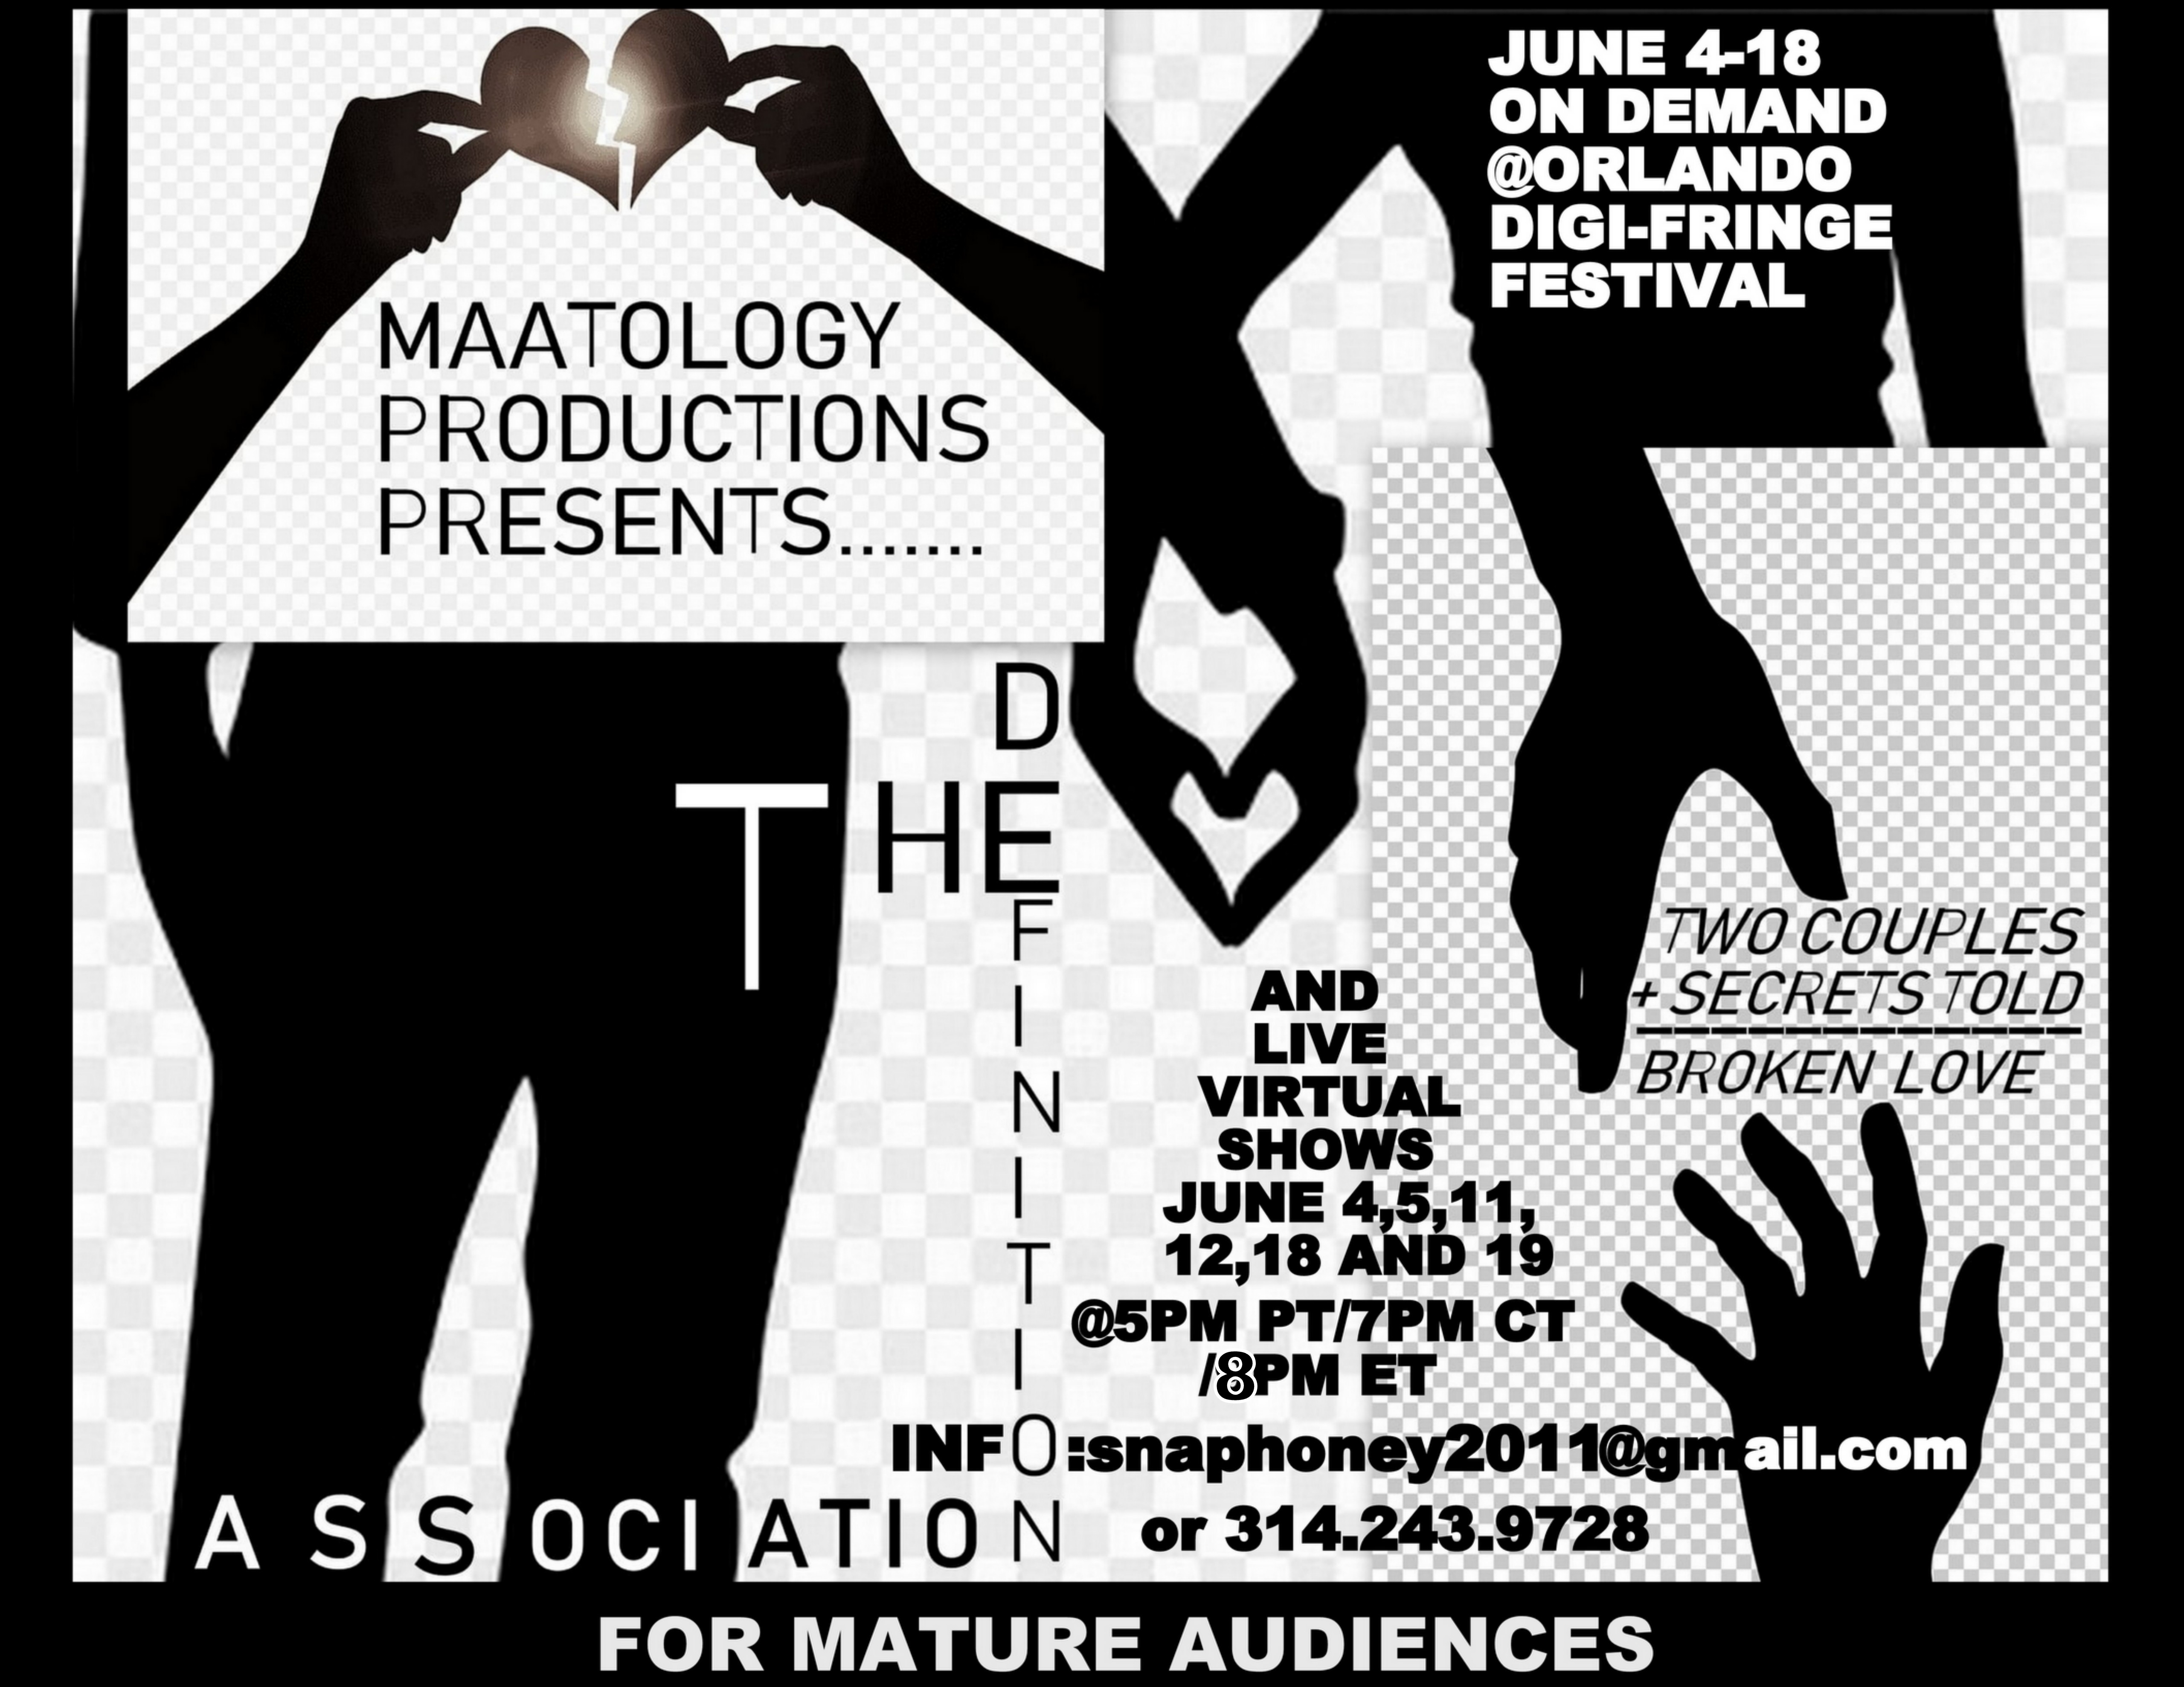 THE DEFINITION ASSOCIATION Will Be Performed By Maatology Productions at Orlando Fringe DigiFestival 